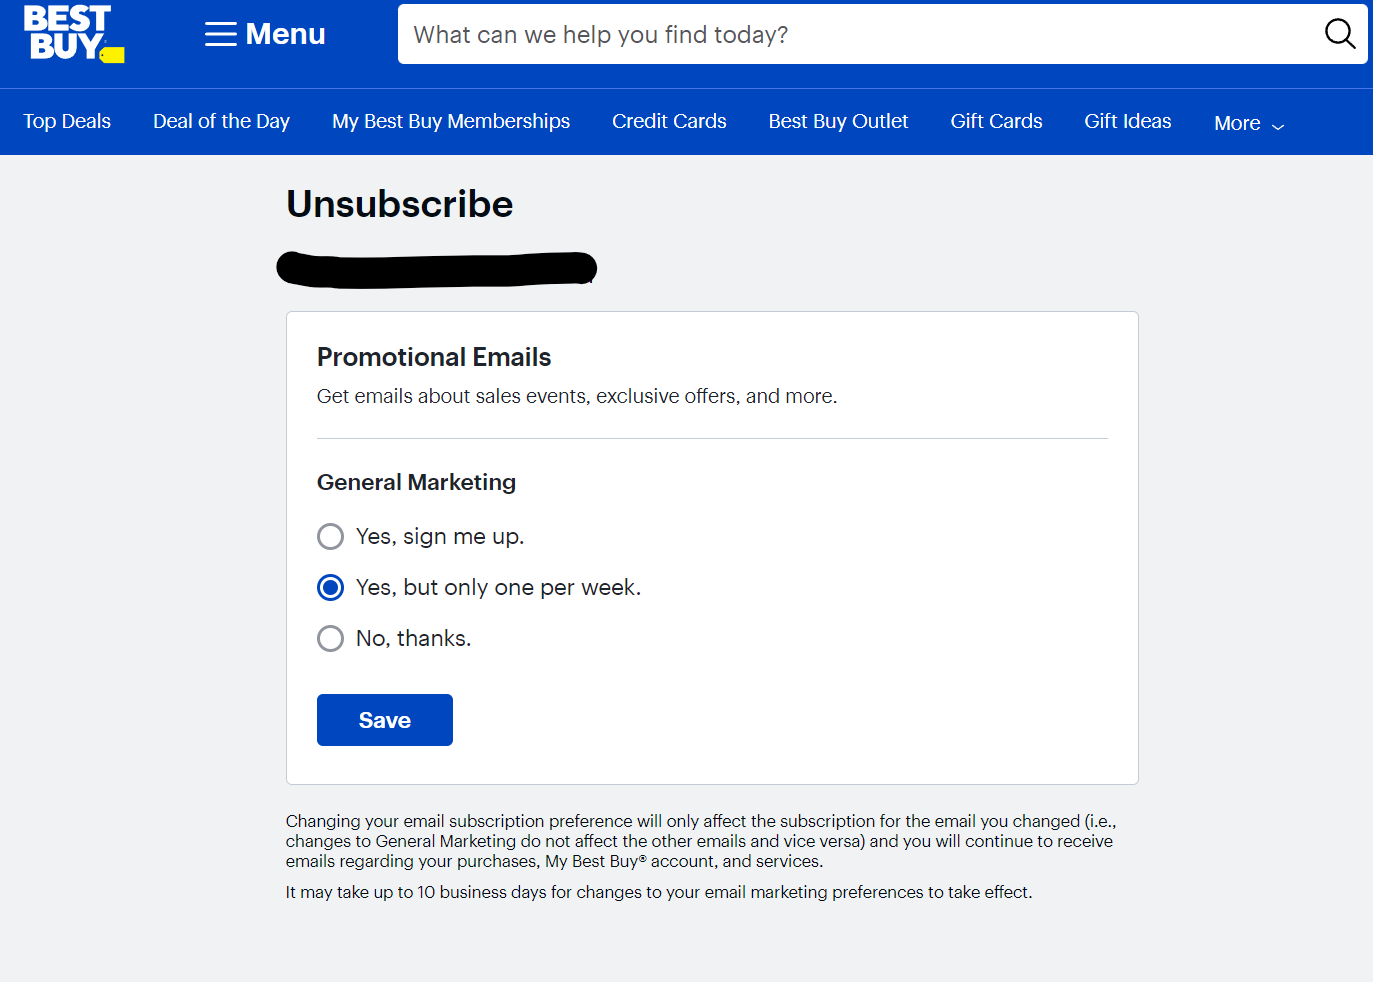 Best Buy unsubscribe options